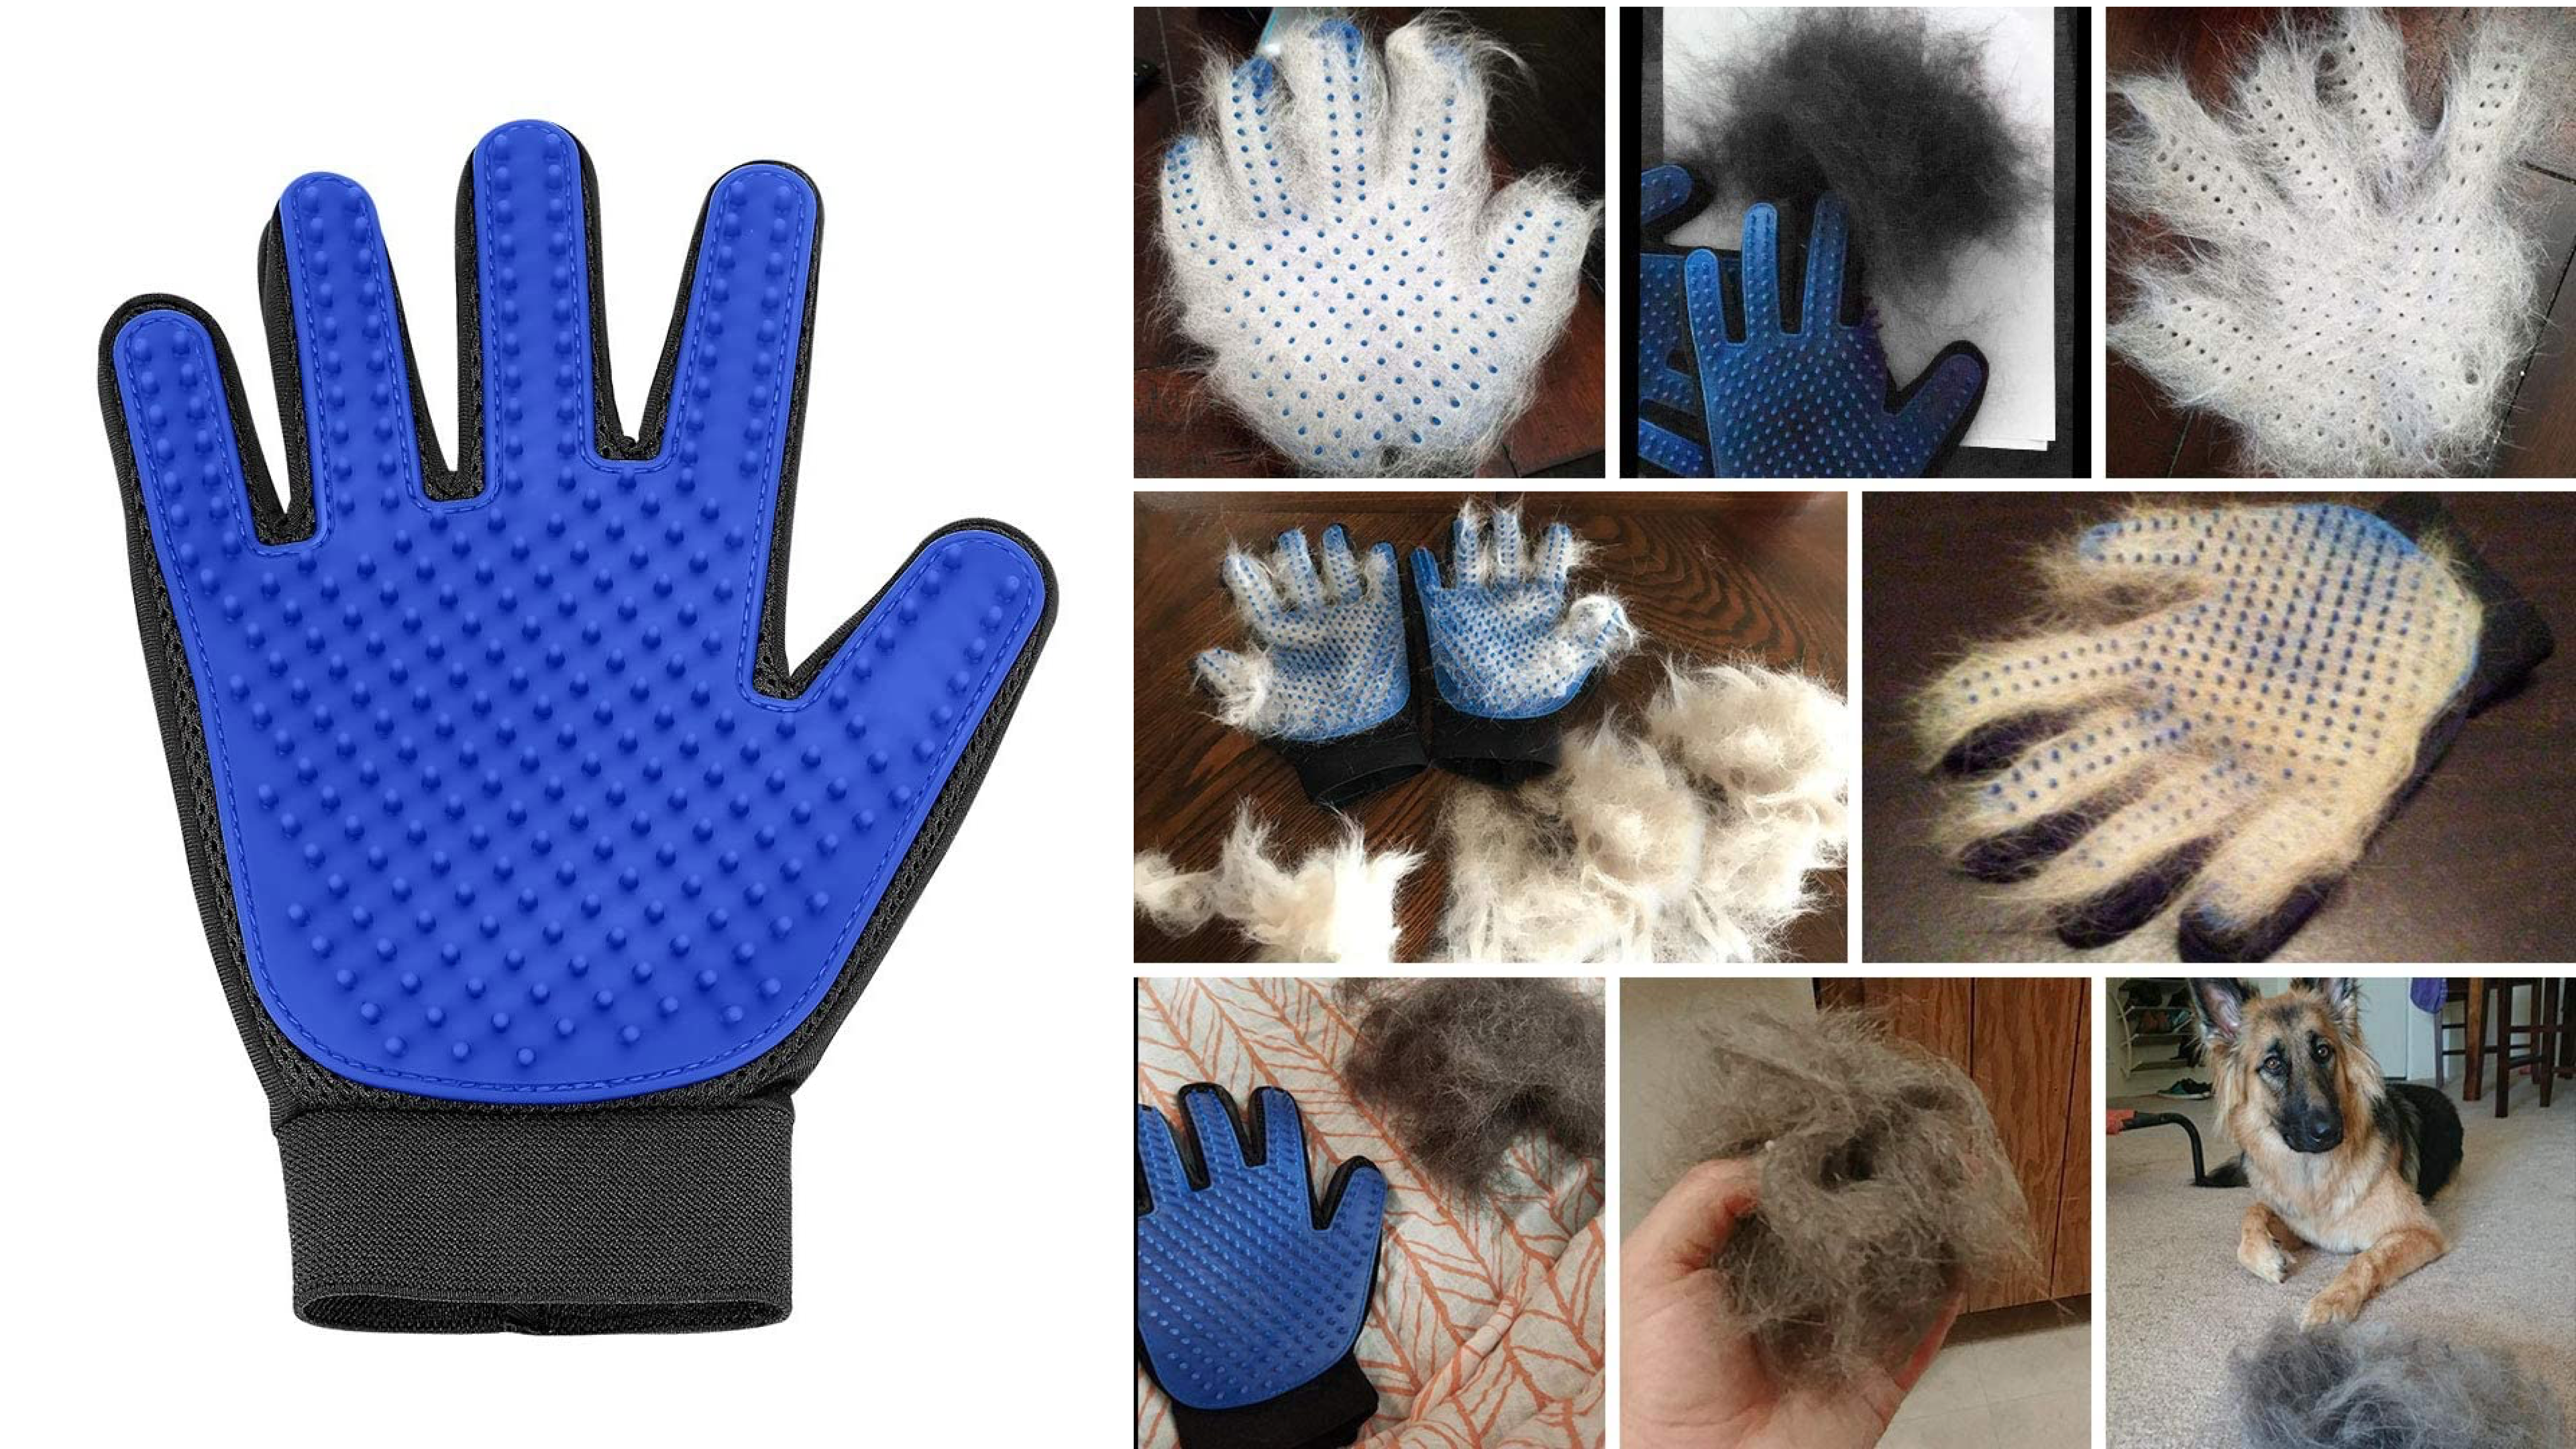 textured brush glove for at-home grooming